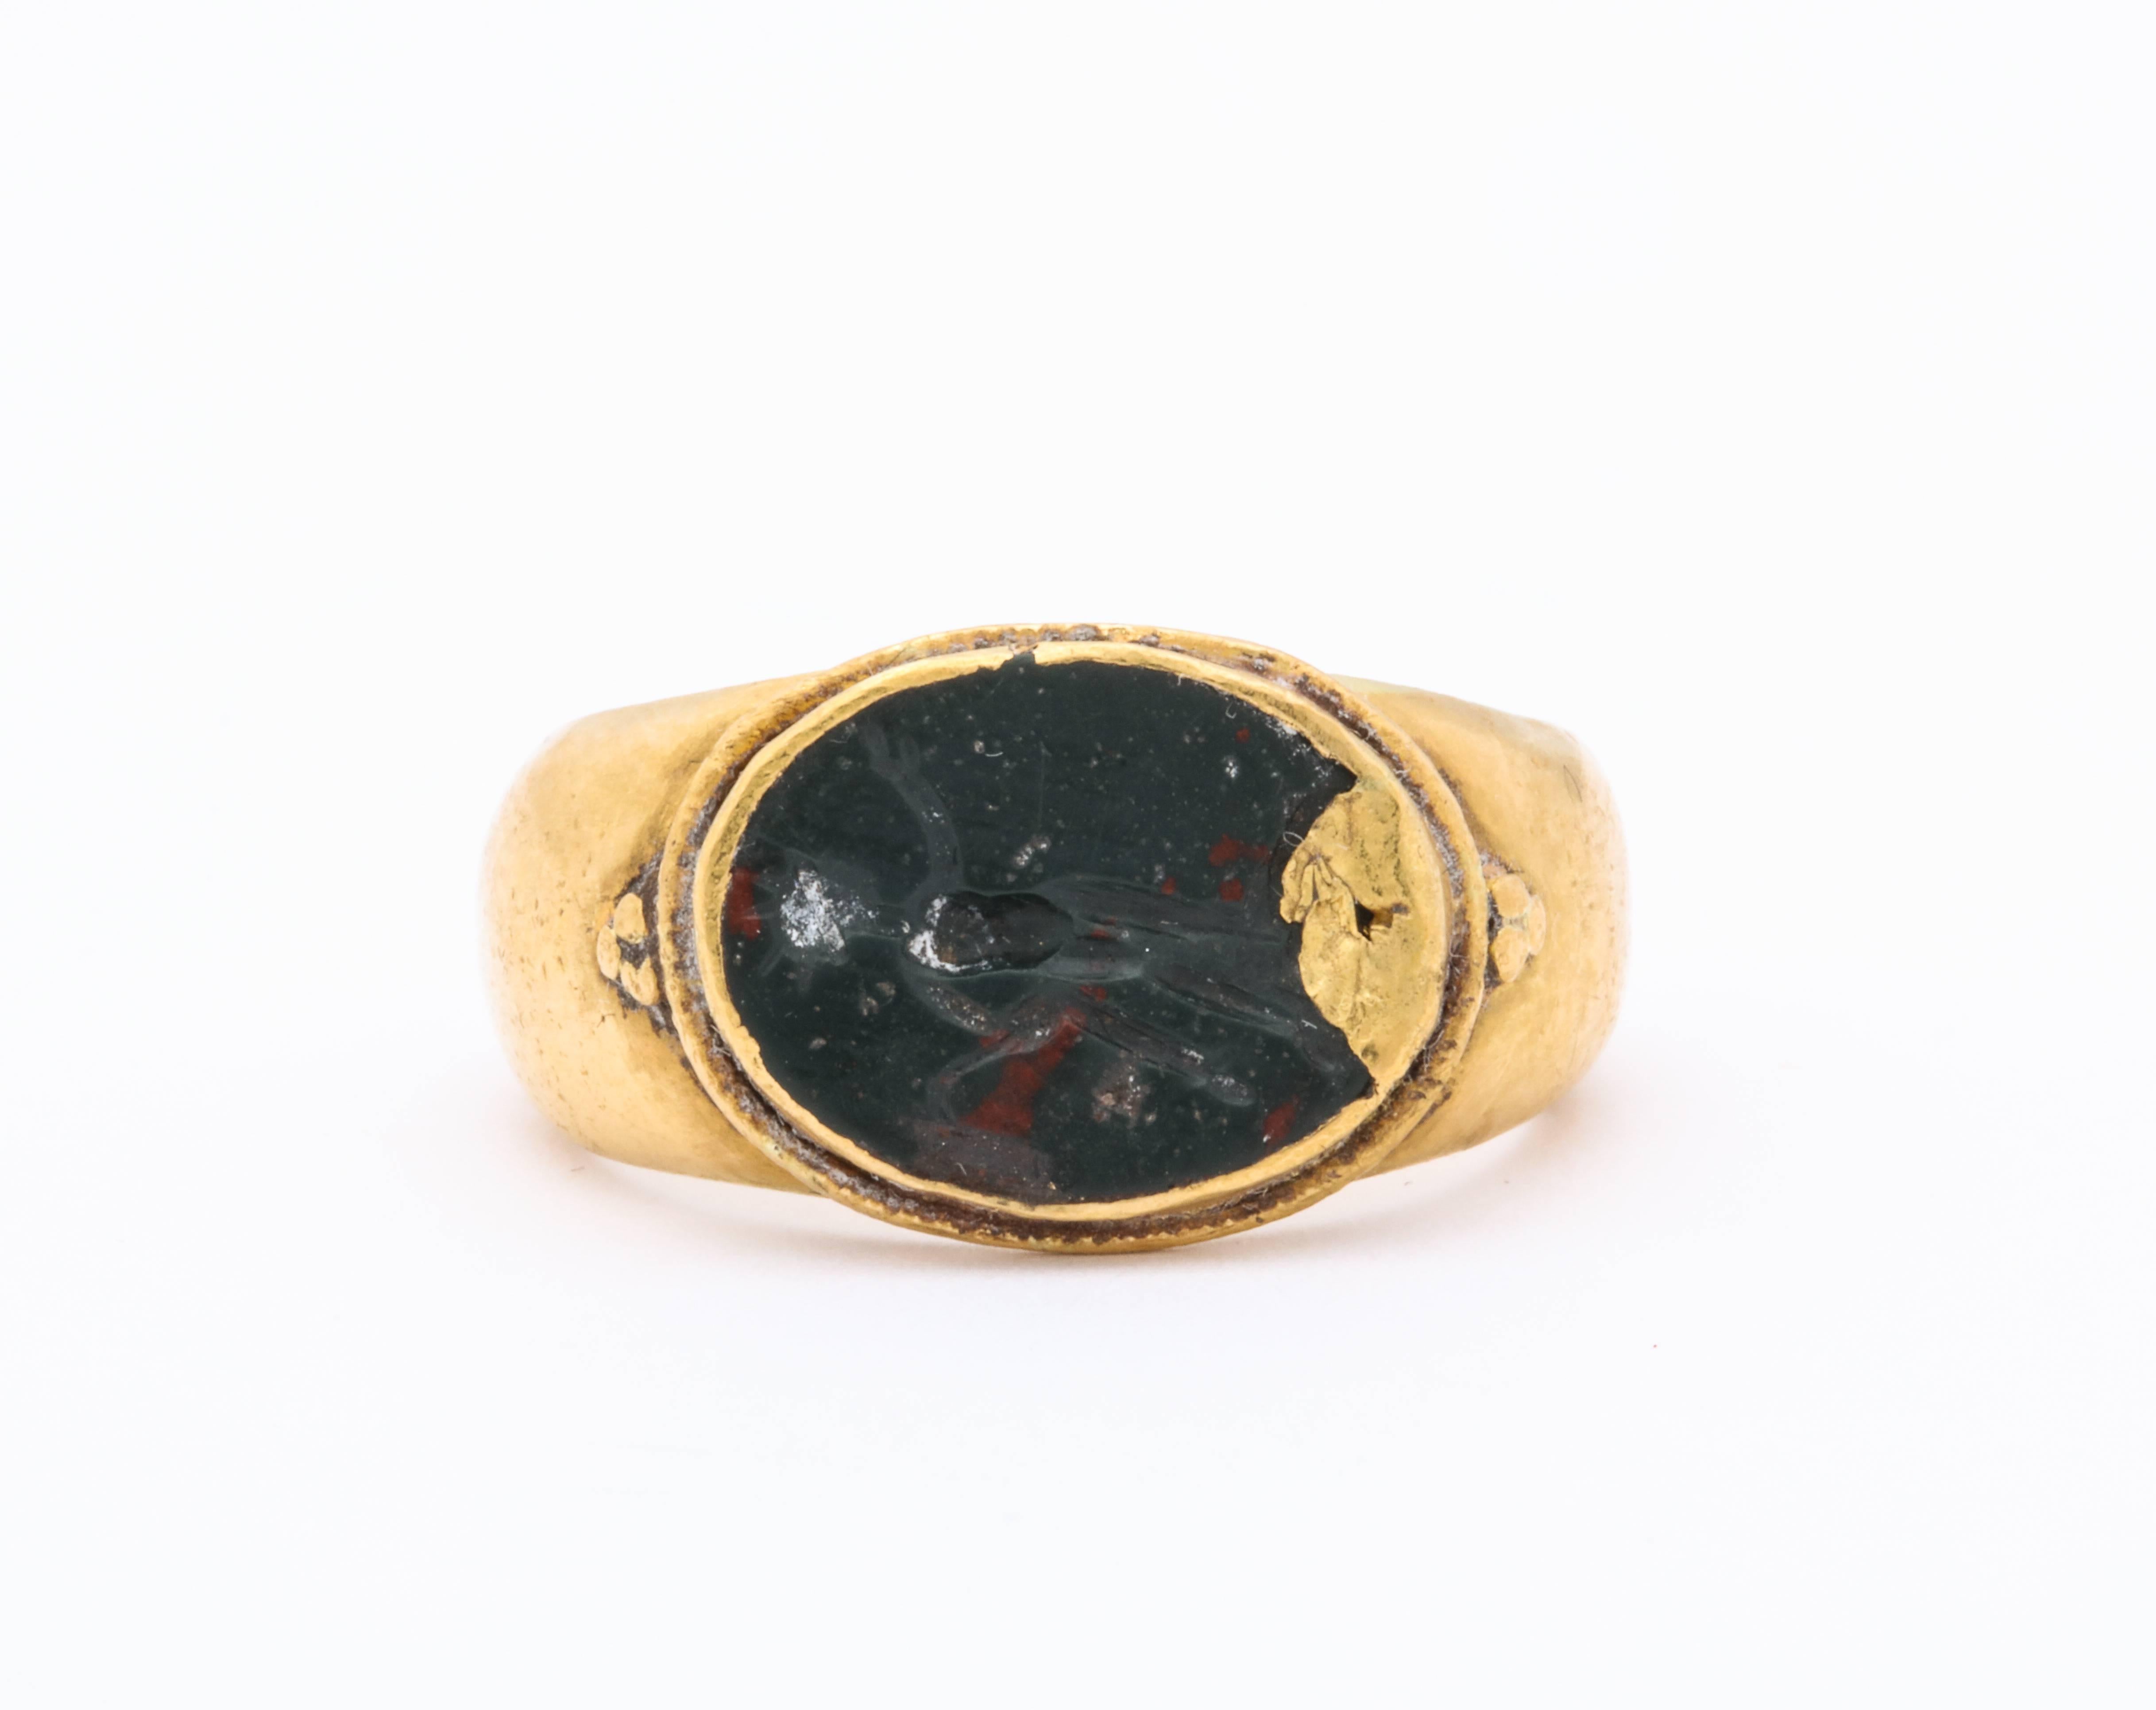 A remarkable and original ancient Roman ring c. 3rd or 4th century A.D. is set with a heliotrope intaglio showing Helios, God of the Sun tests at least 18 Kt gold. Helios holds a whip with which to drive his horses and wears his Crown of the Sun and